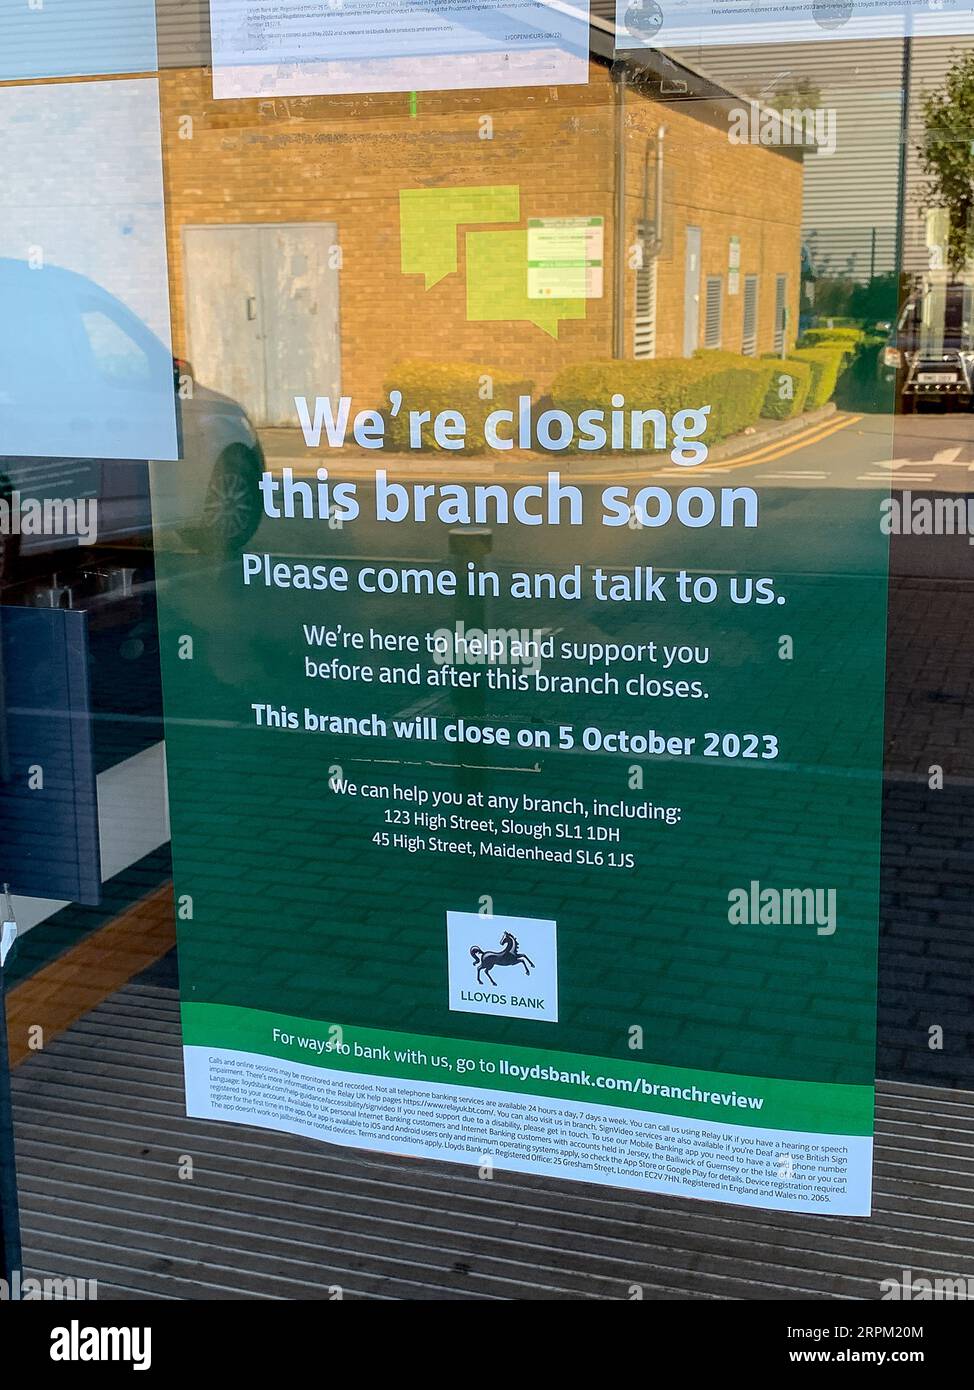 Slough, Berkshire, UK. 4th September, 2023. Yet another Lloyds Bank branch is closing. The Lloyds Bank on Slough Trading Estate that is used by many local businesses in the Slough area is closing on 5th October 2023. The Lloyds branch in Windsor closed recently too. Credit: Maureen McLean/Alamy Live News Stock Photo